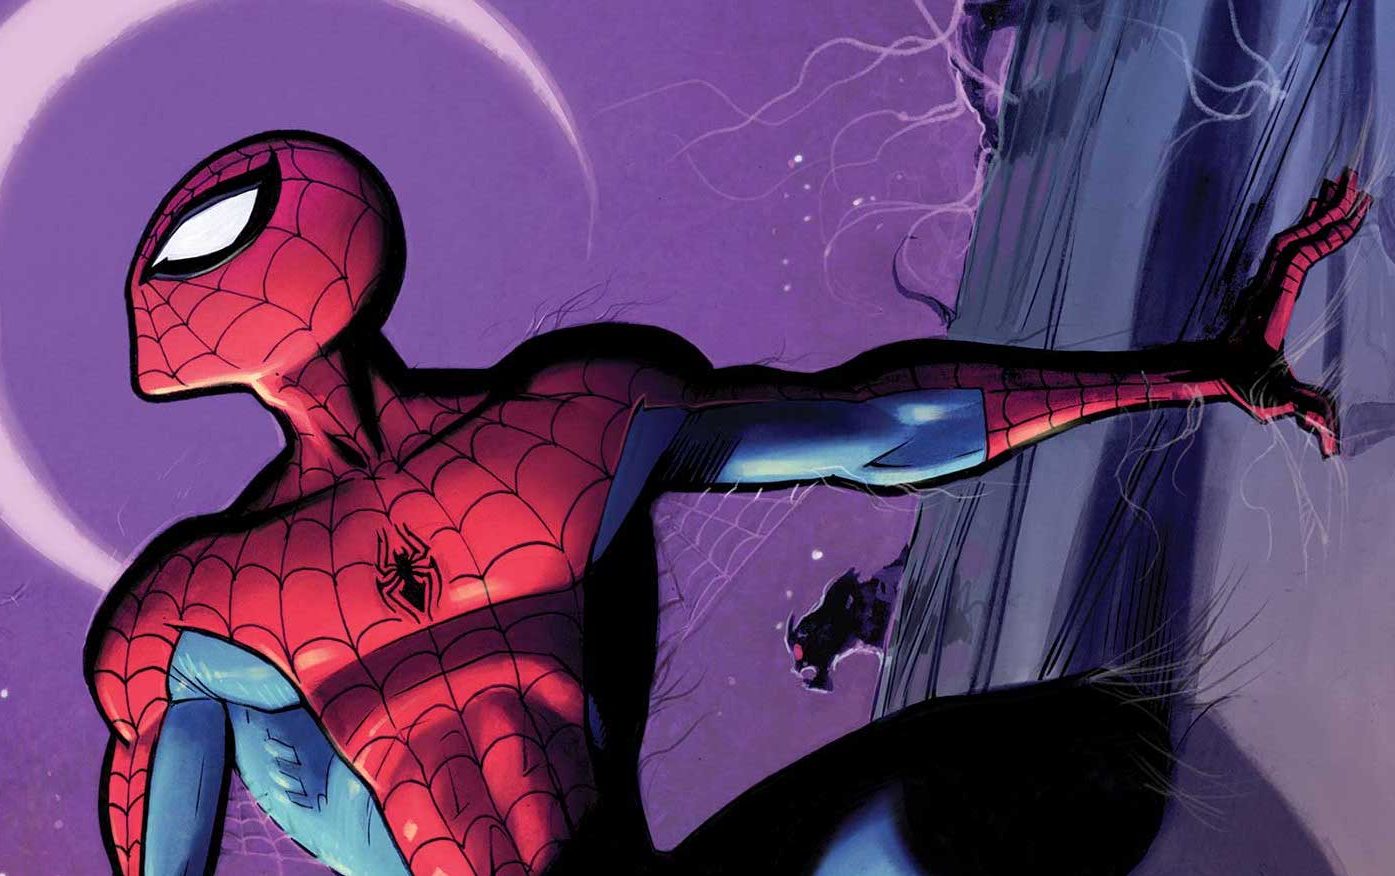 'Spine-Tingling Spider-Man' #1 brings the scares and action